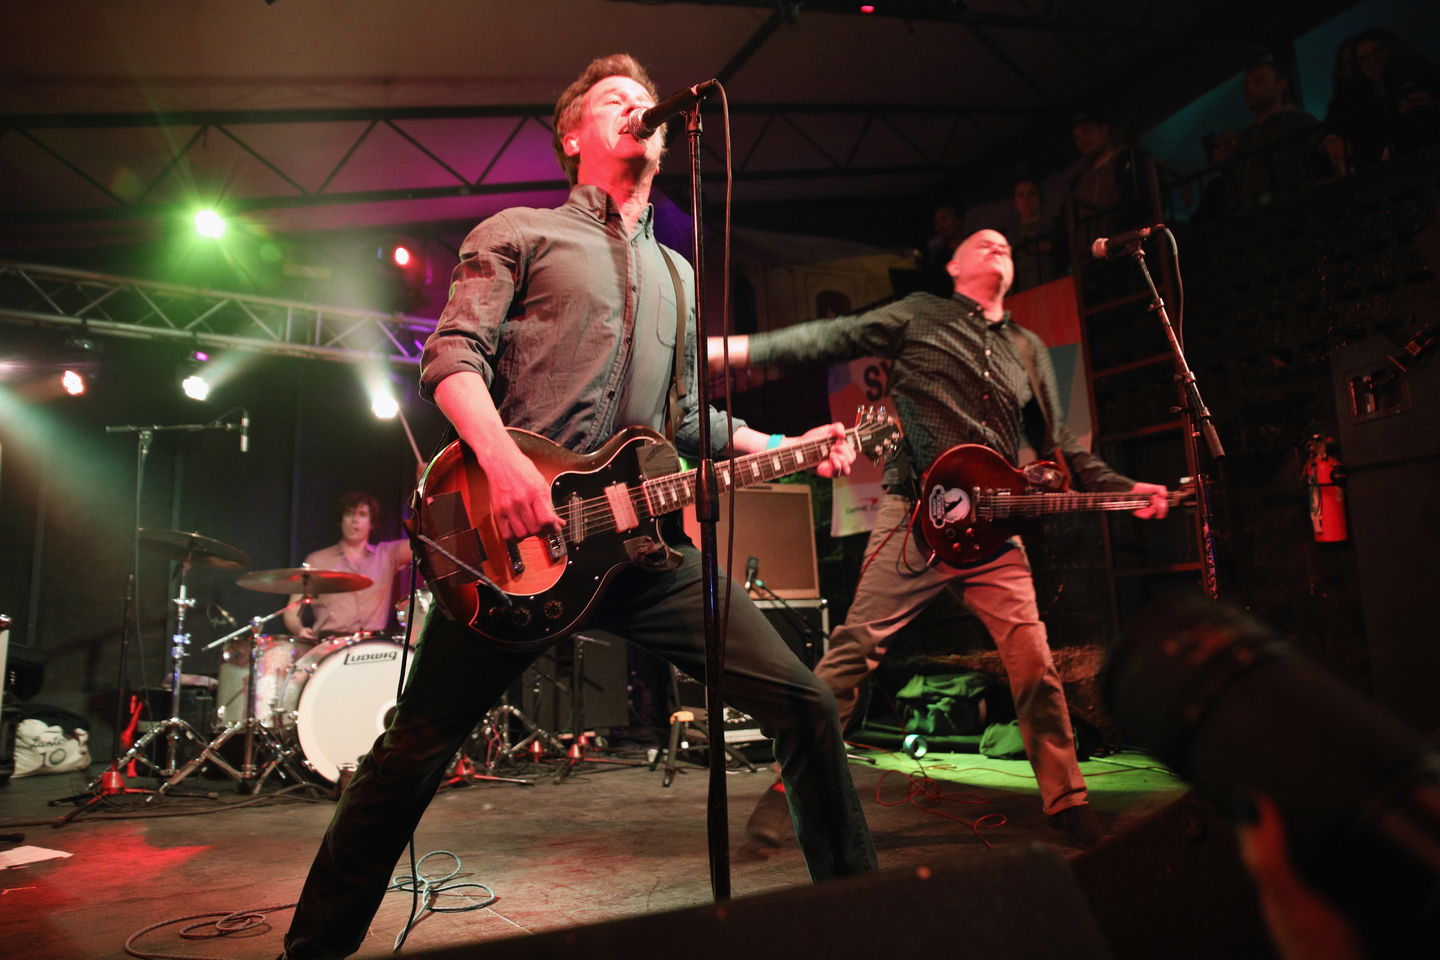 Superchunk performed at The Onion / AV Club showcase at Mohawk. Photo by Mike Jordan/Getty Images for SXSW